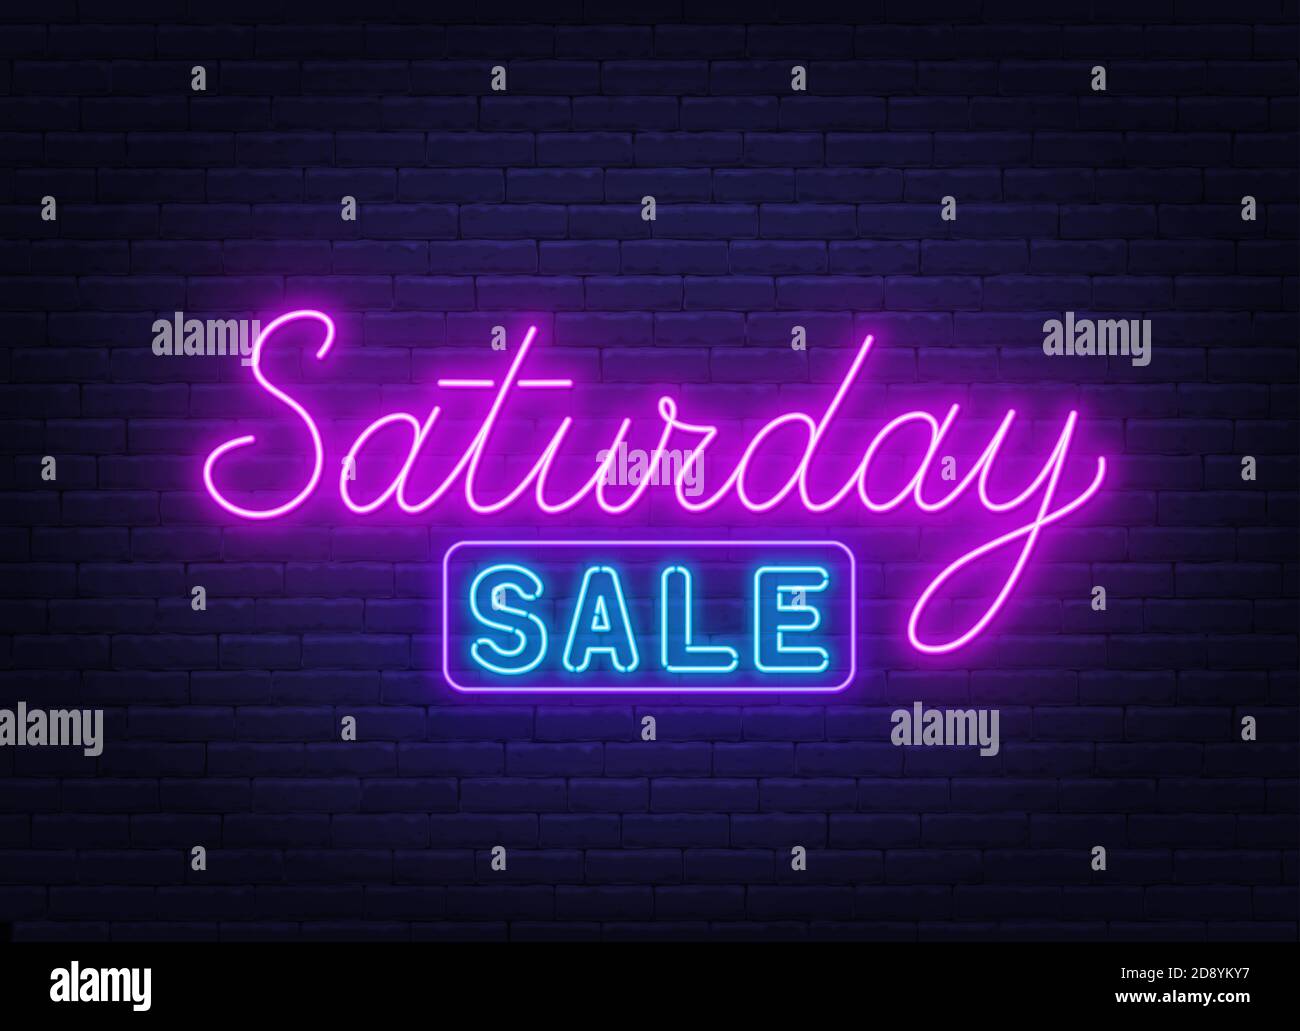 Saturday Sale neon sign on brick wall background. Stock Vector